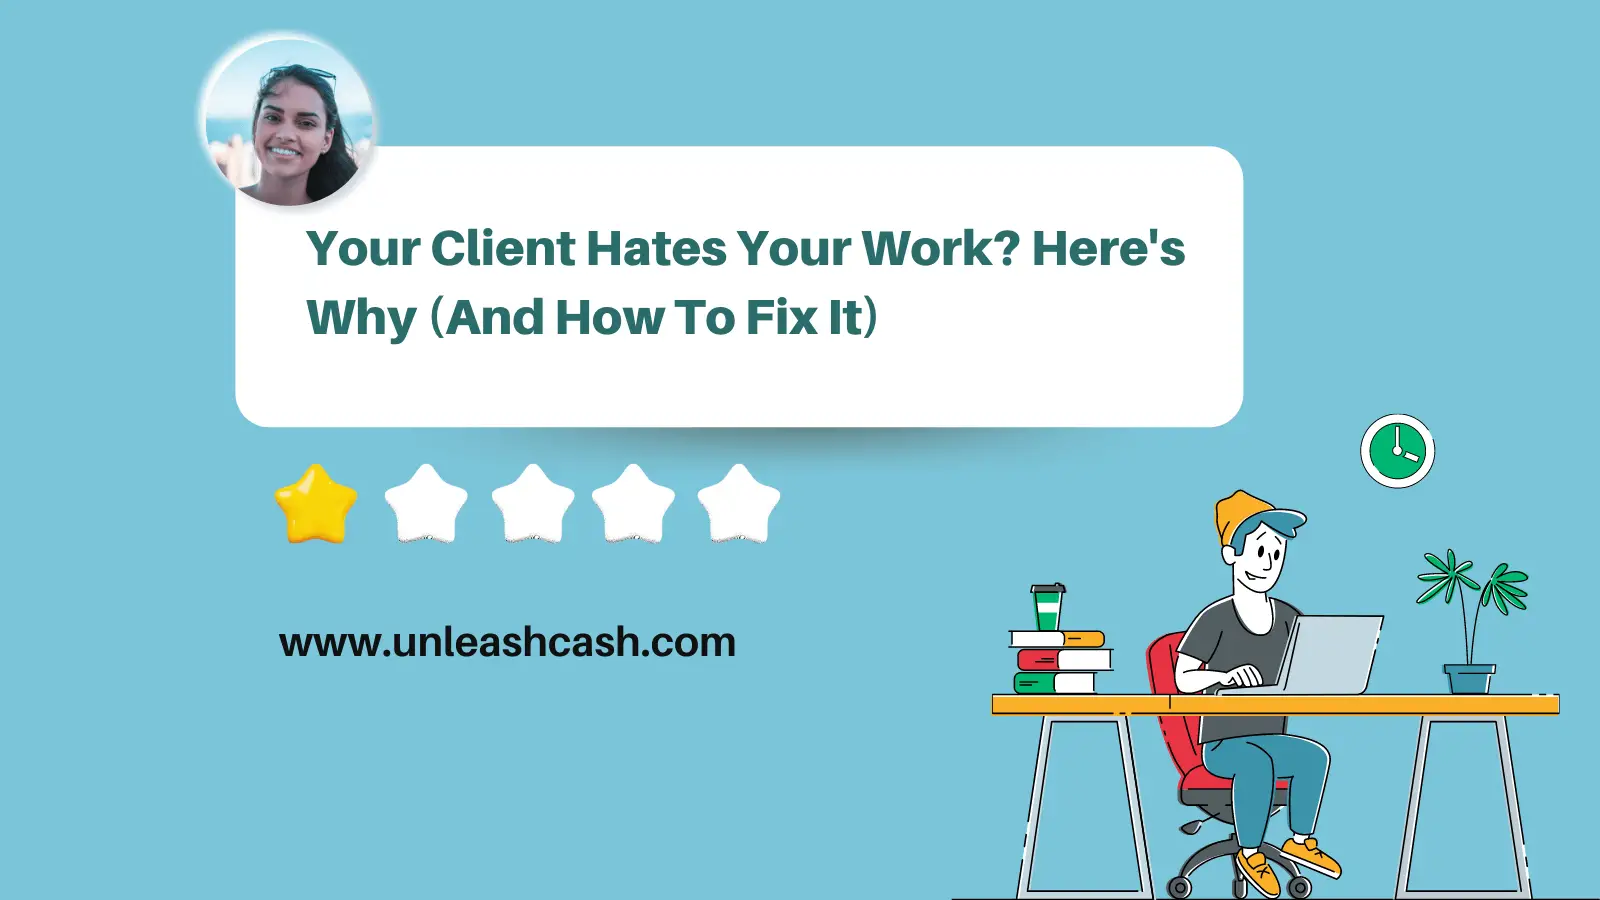 Your Client Hates Your Work? Here's Why (And How To Fix It)